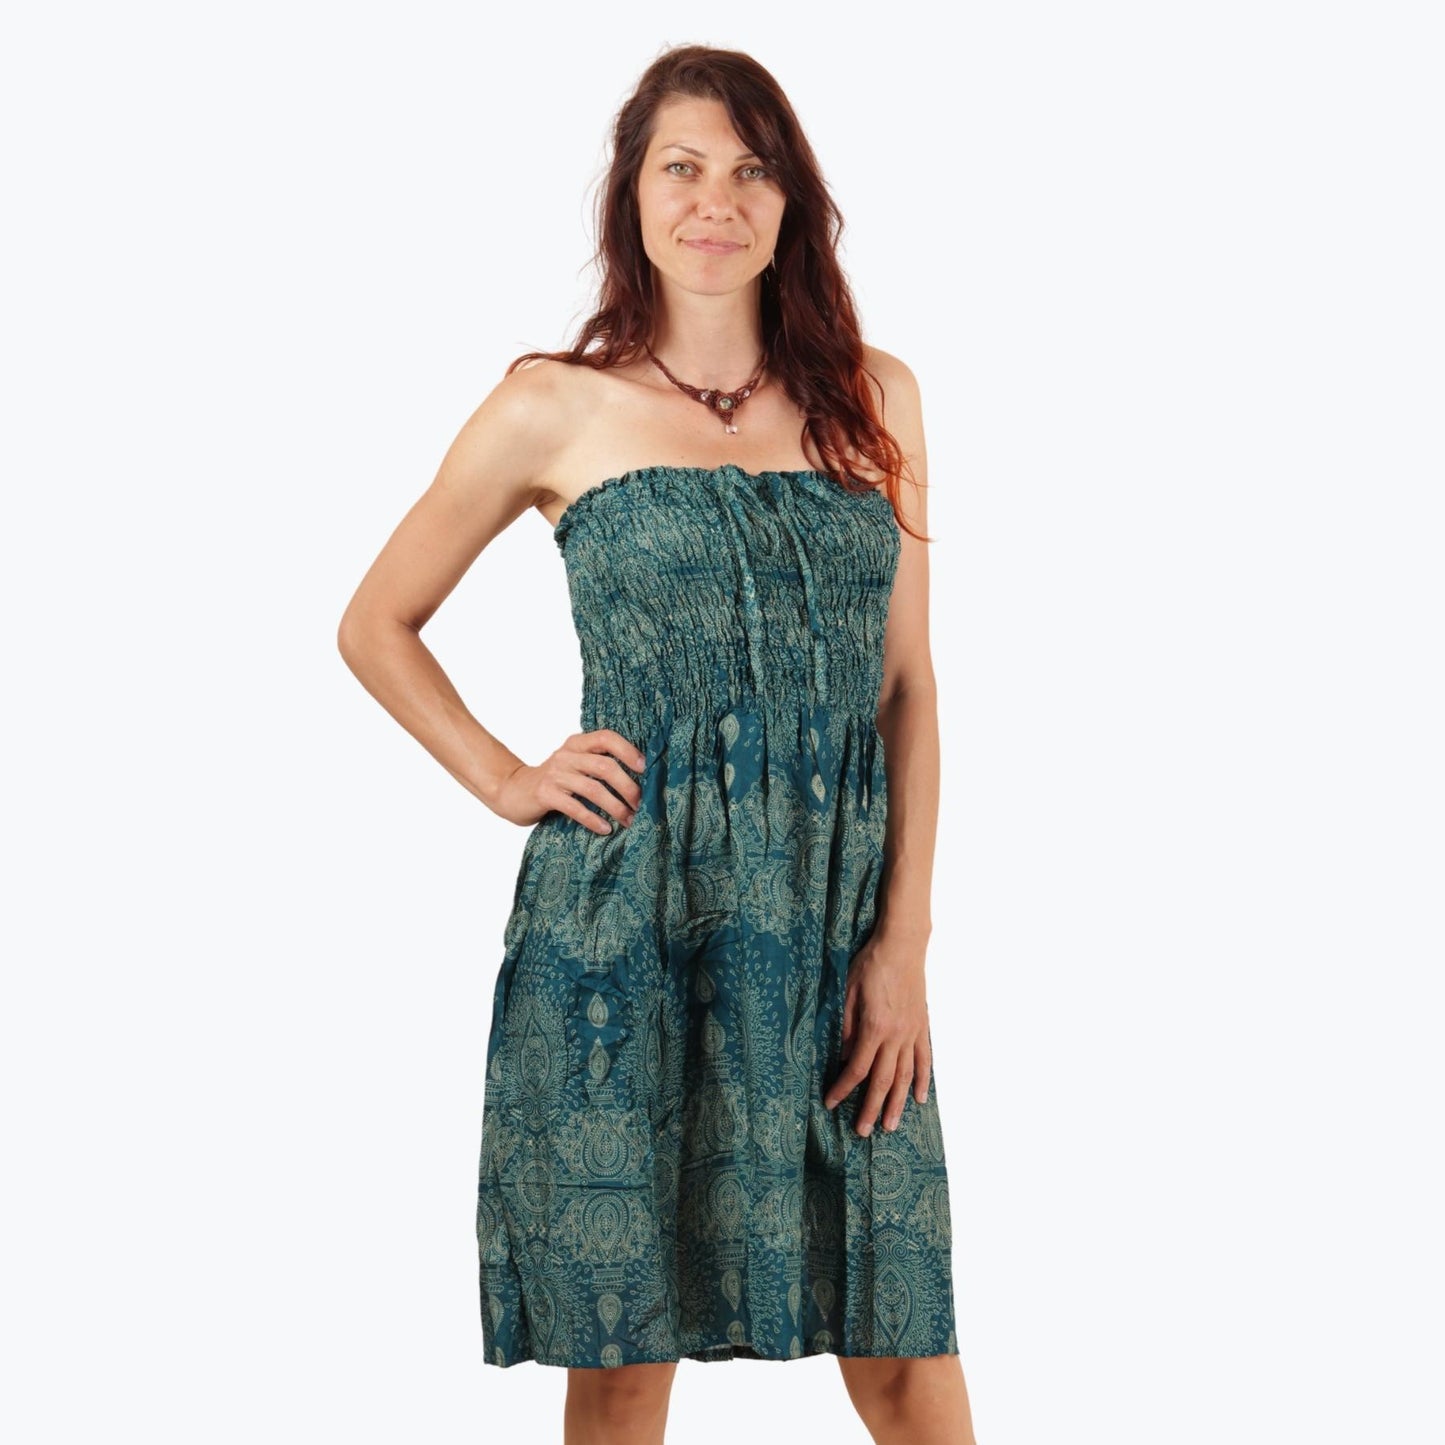 Freely dress - Turquoise